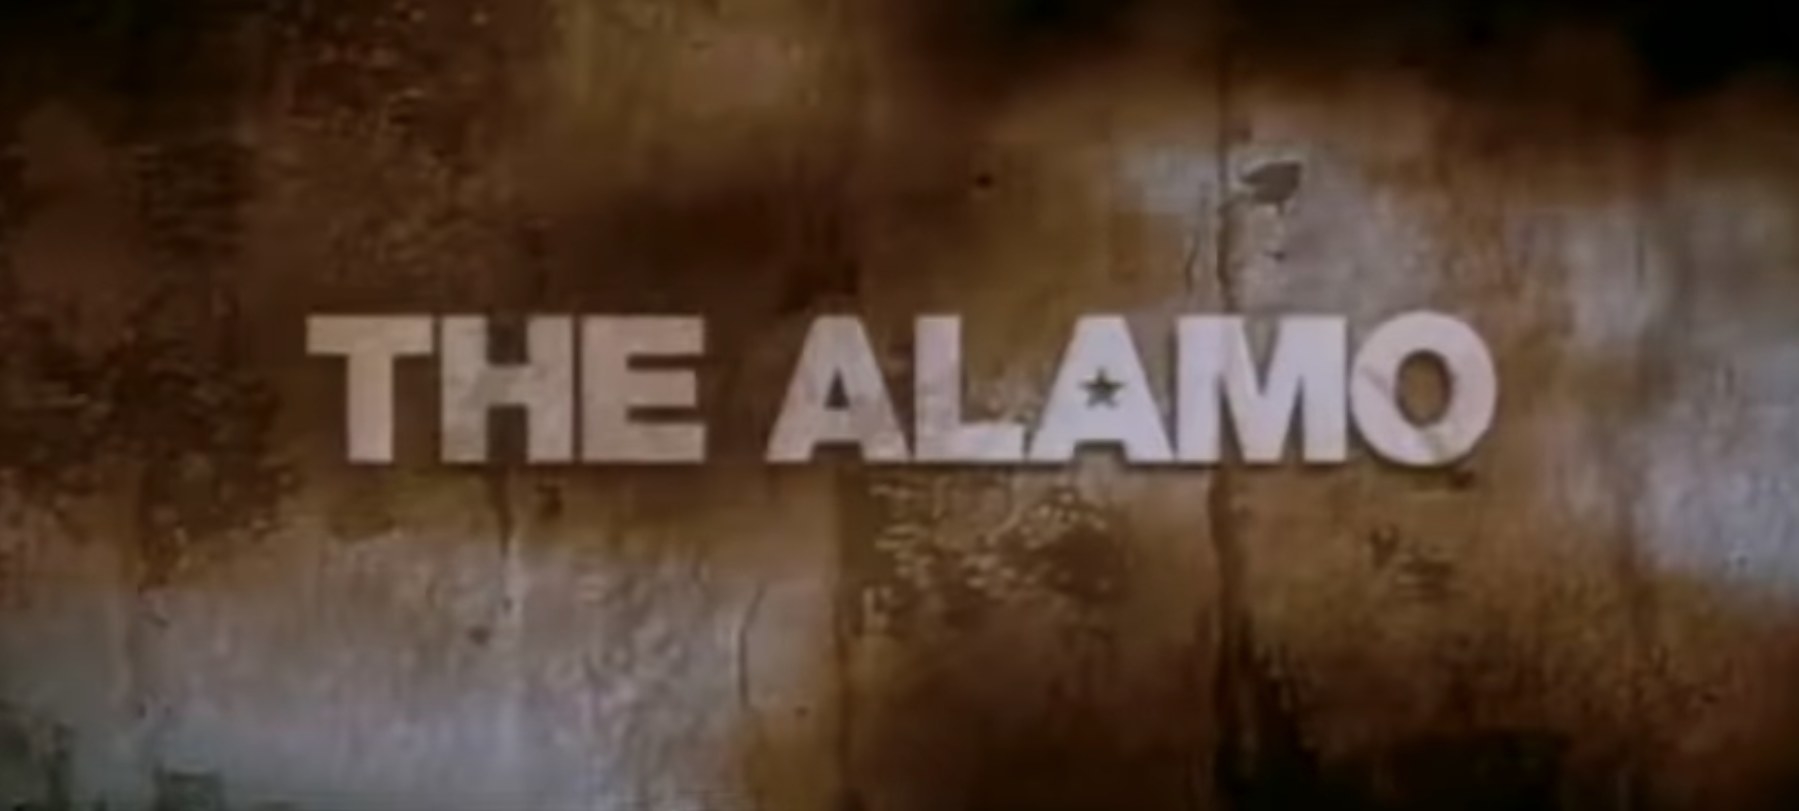 The title card for &quot;The Alamo&quot;